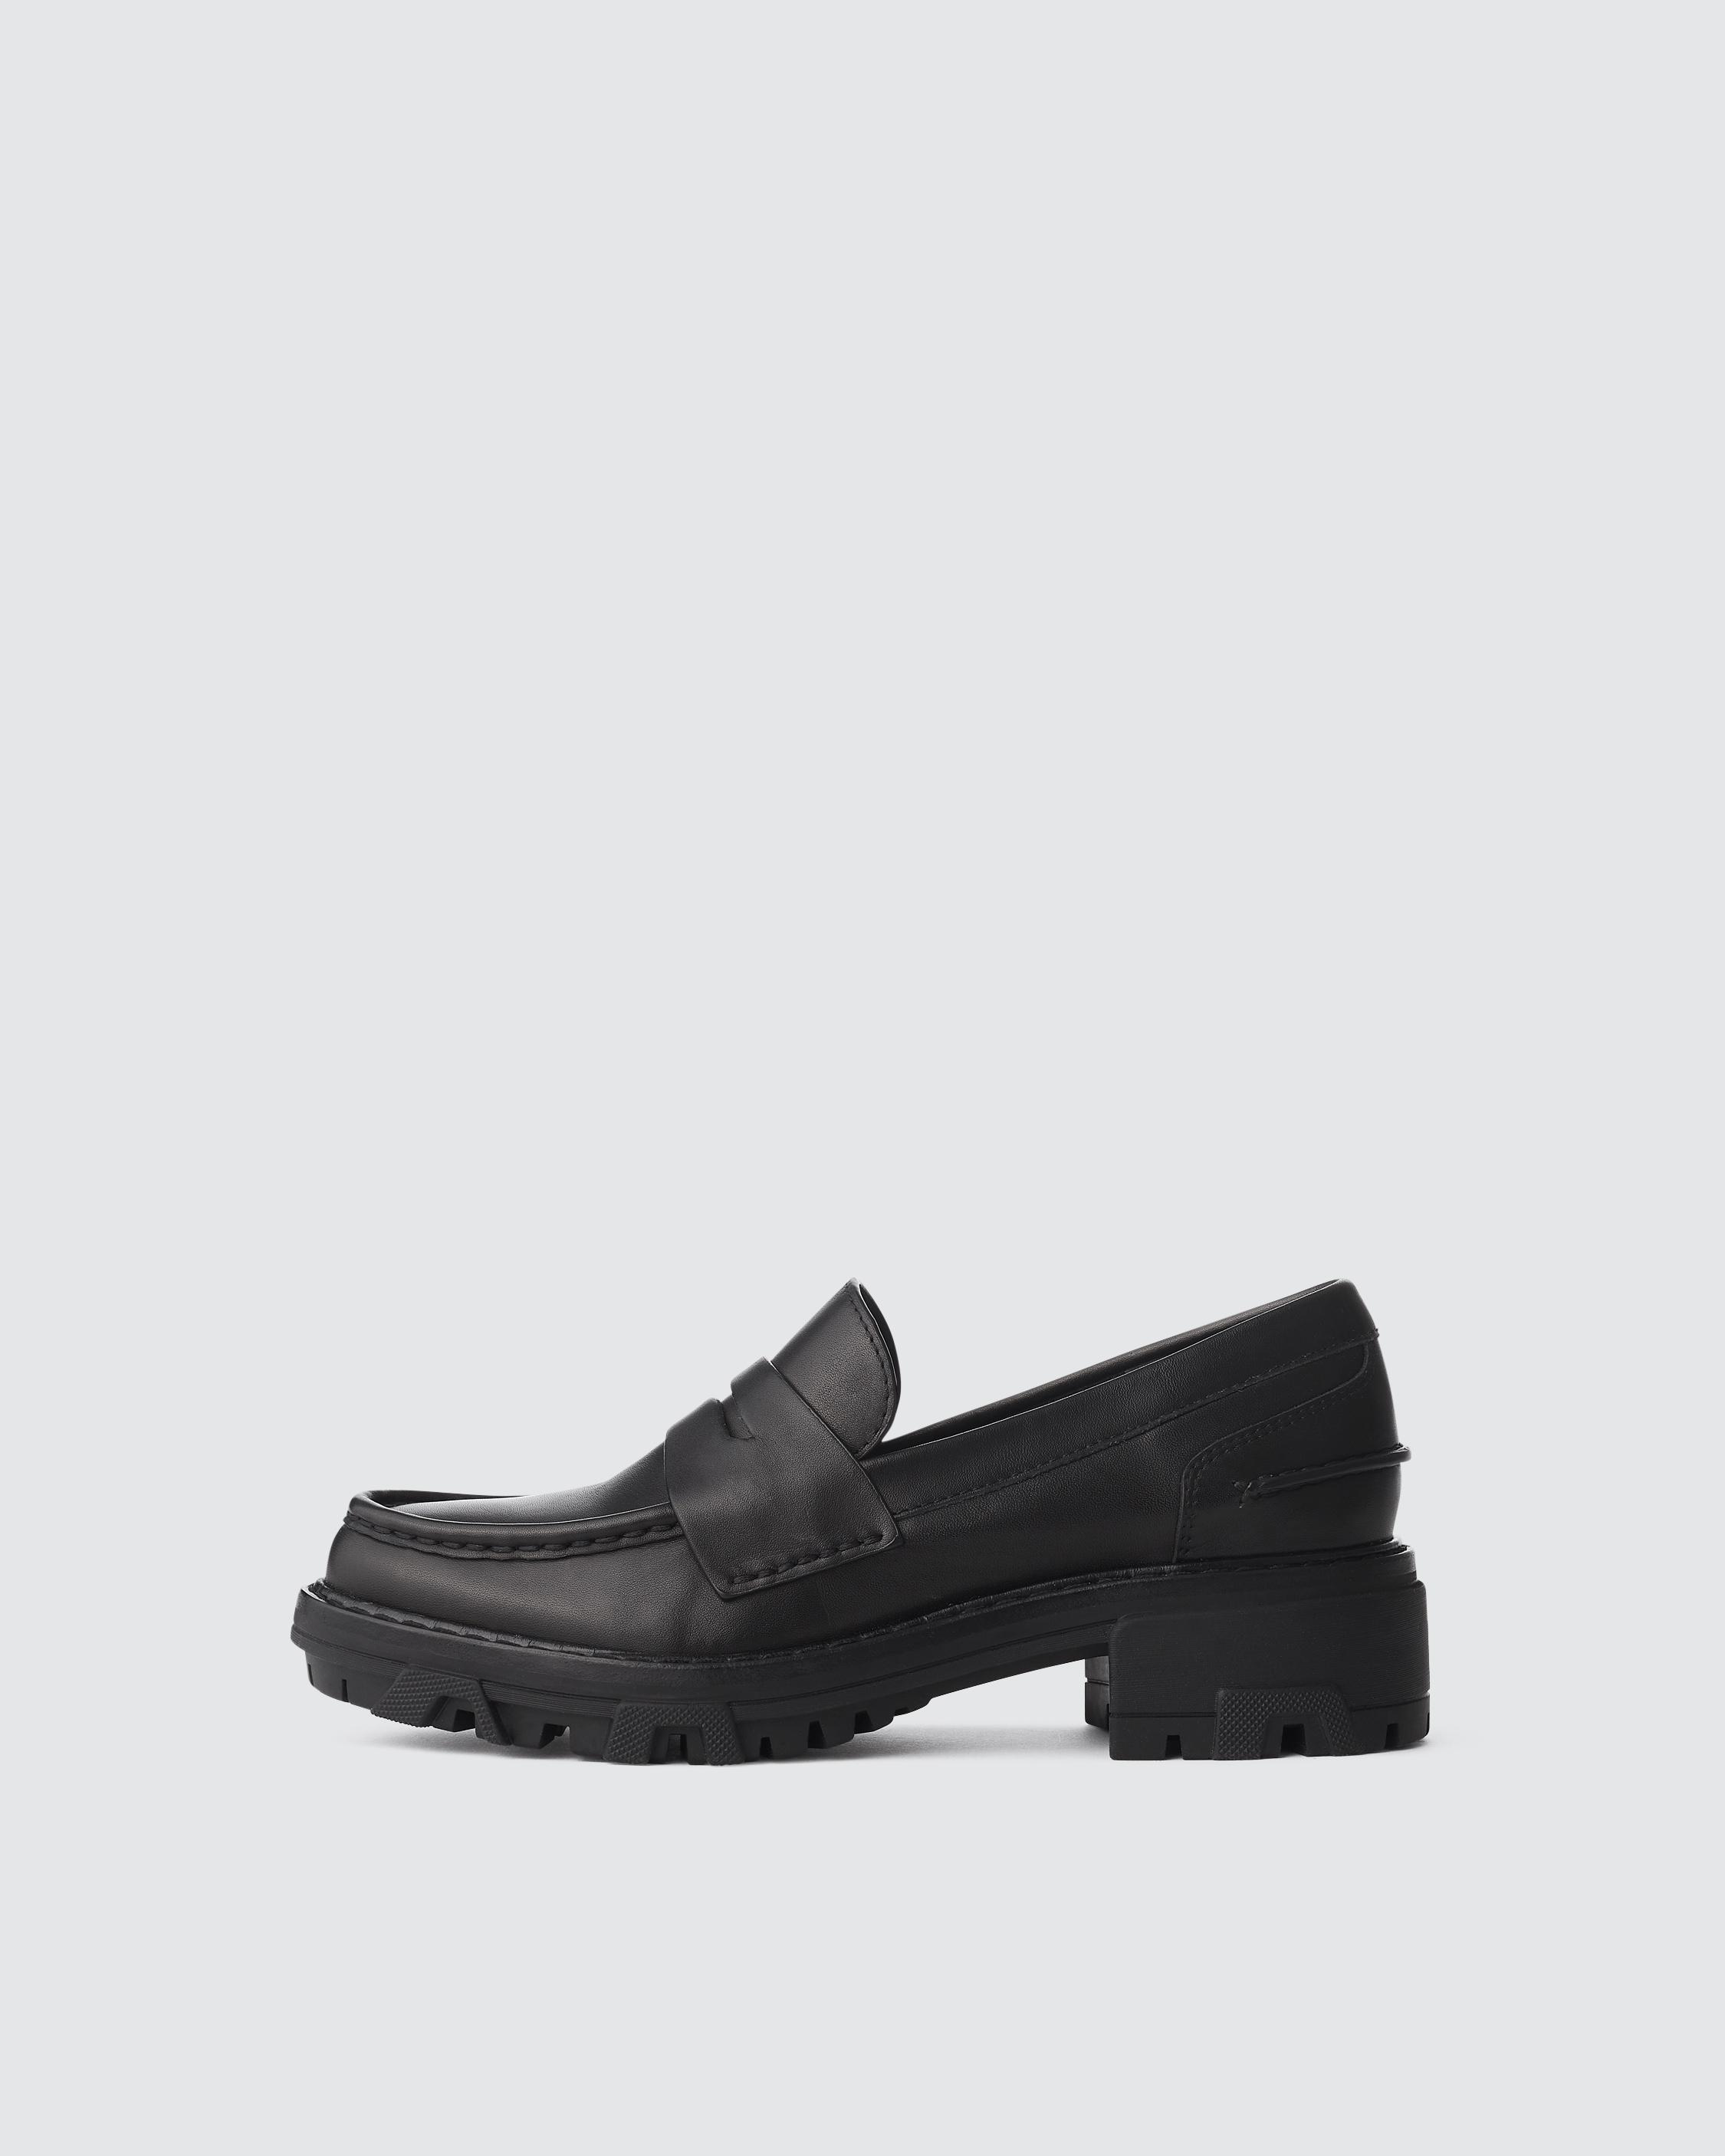 Shiloh Loafer - Leather